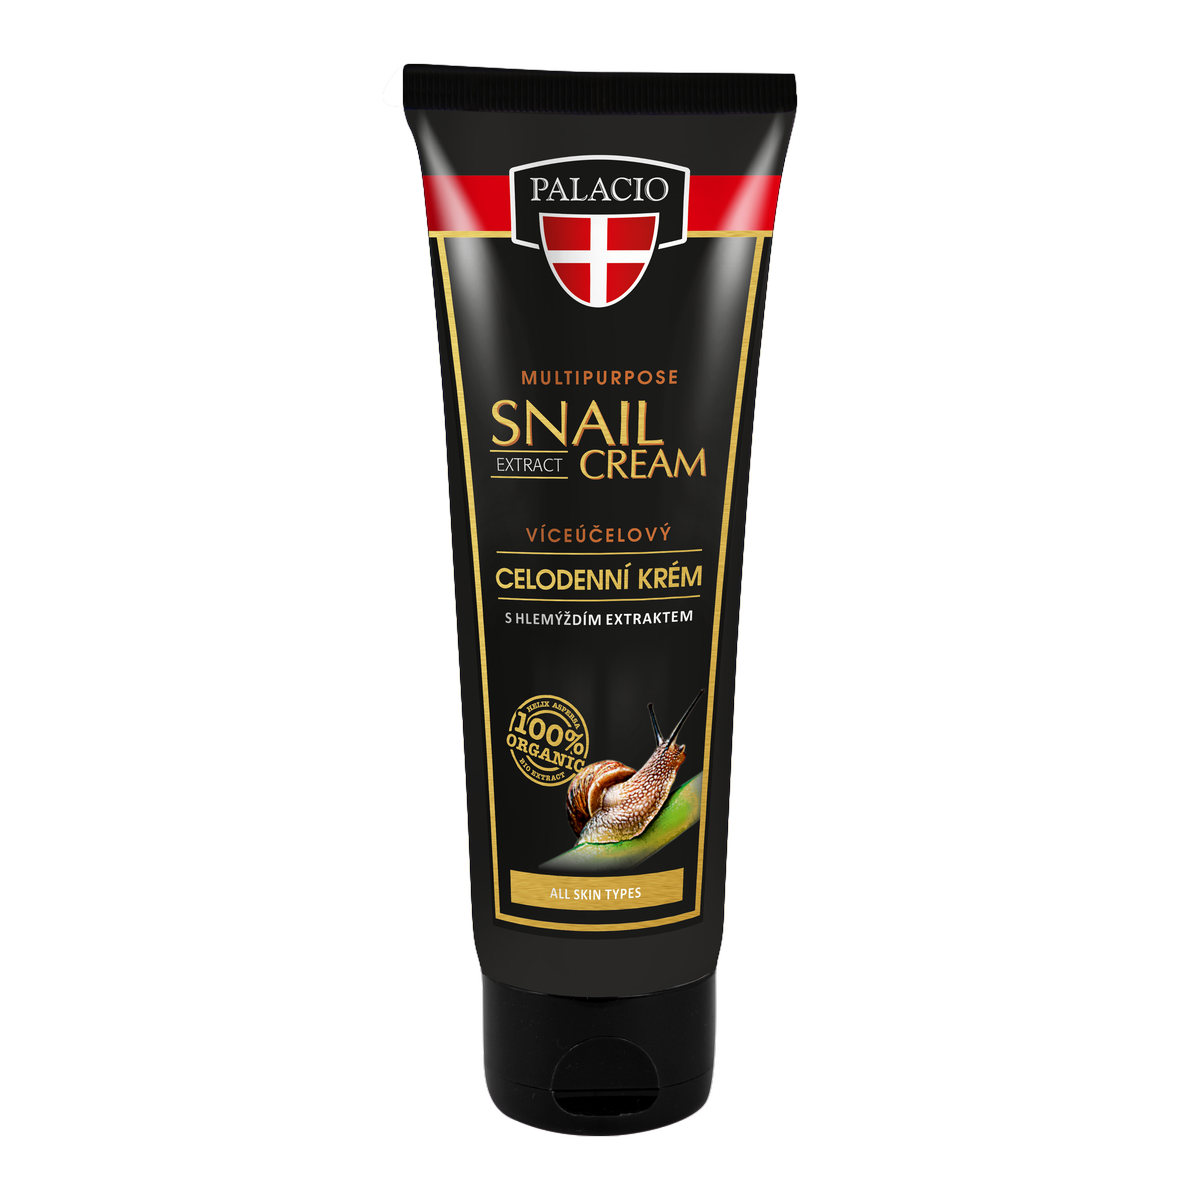 SNAIL EXTRACT Multipurpouse Cream 125ml P1305 ENG WEB 99